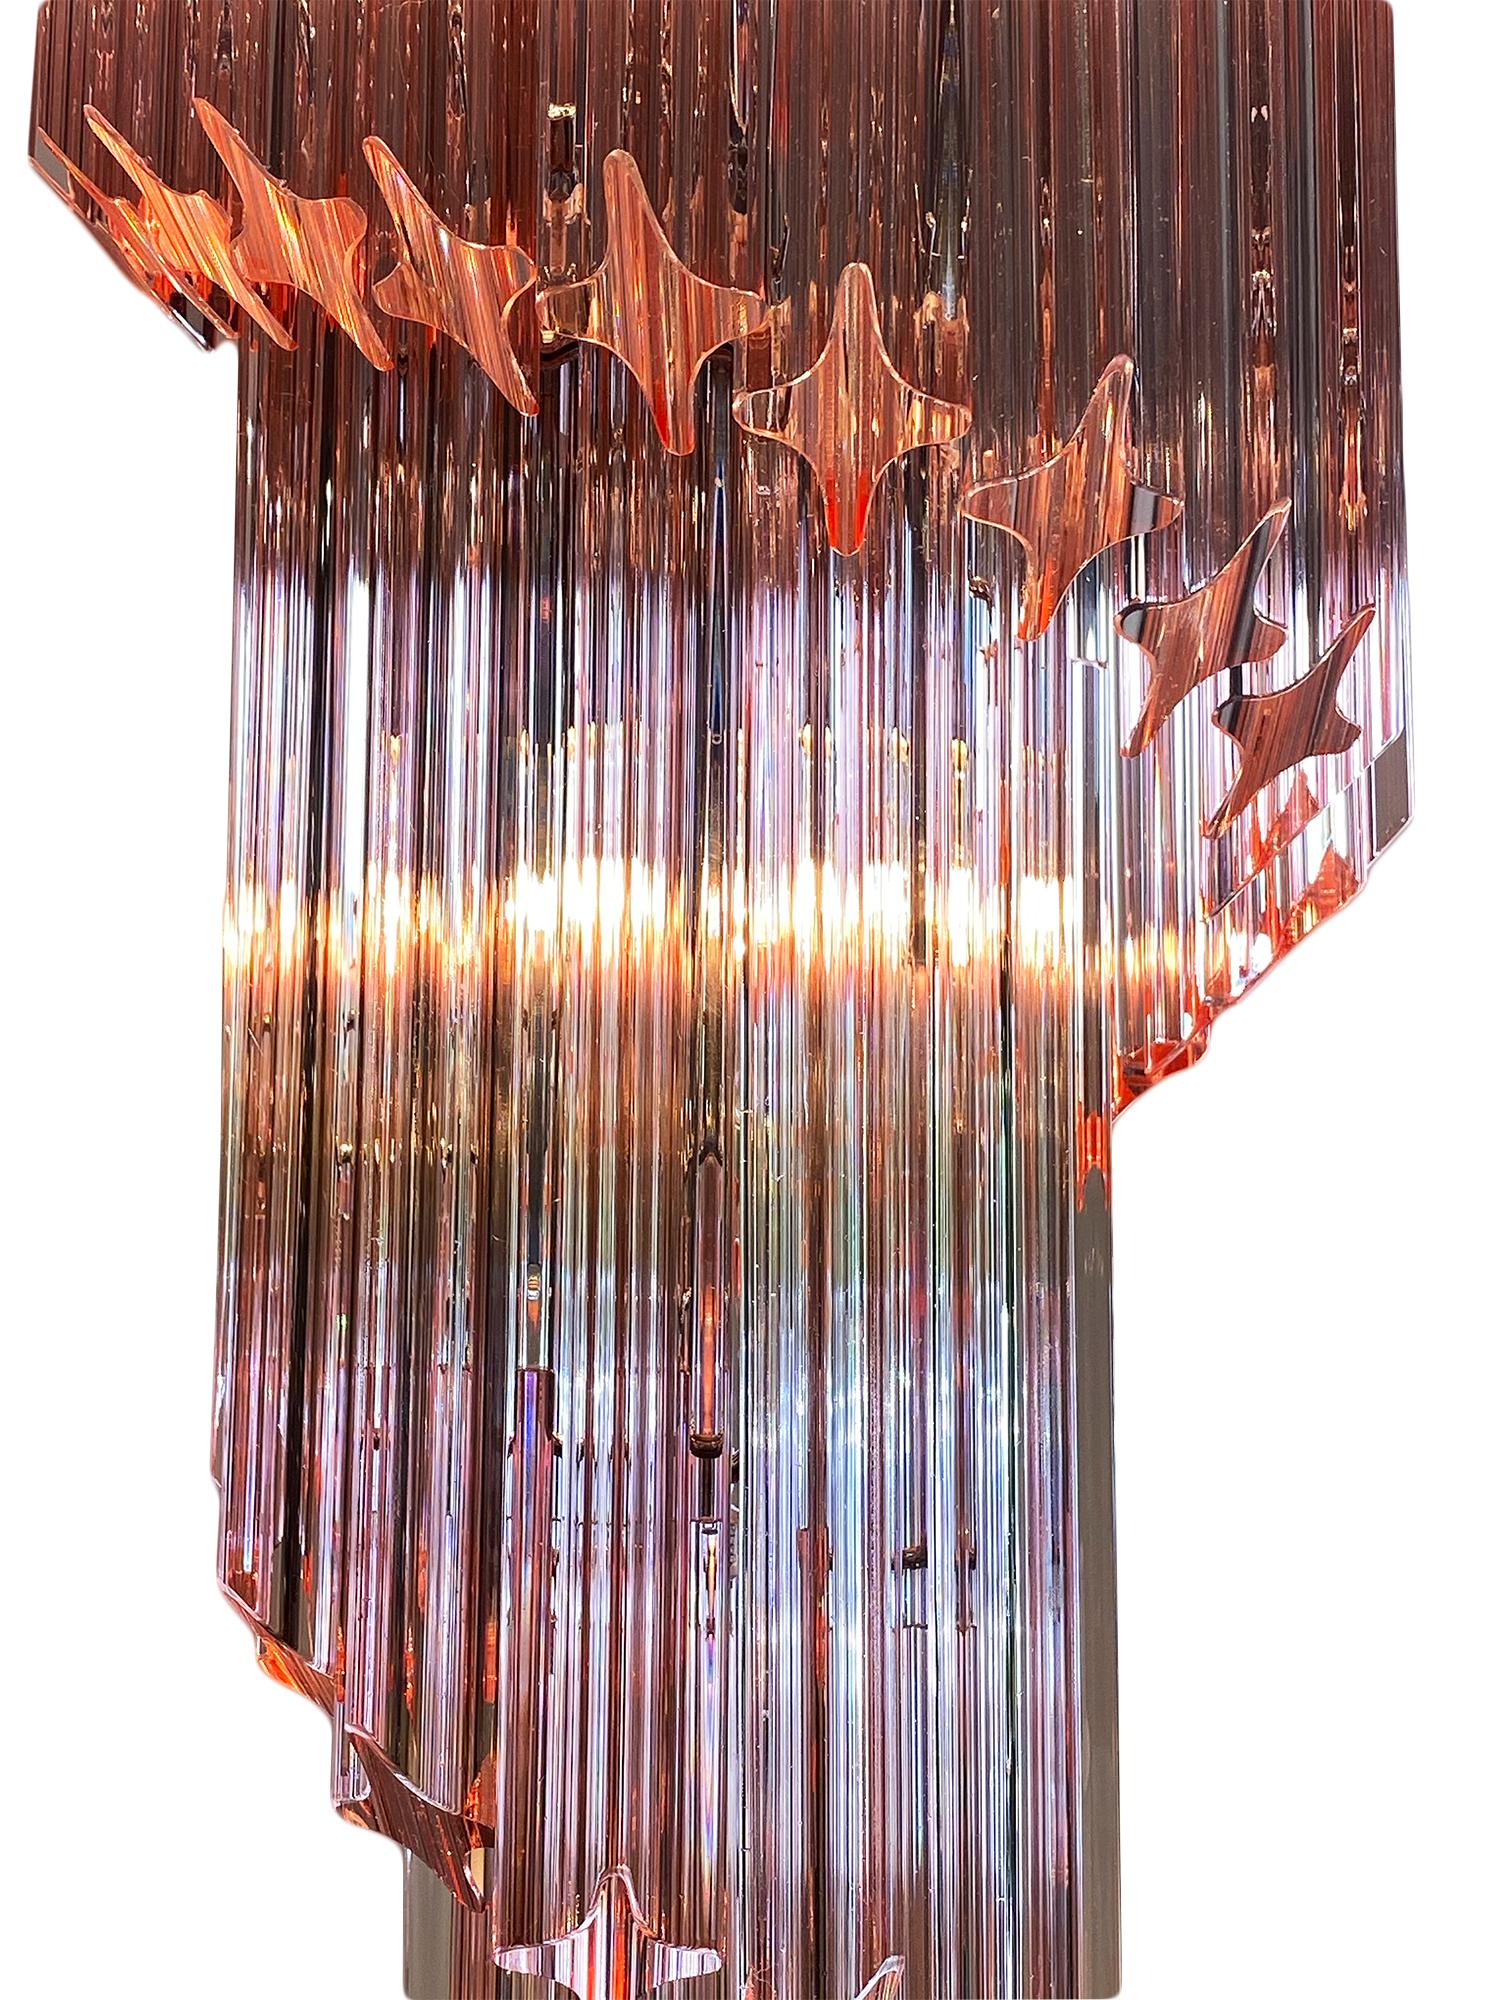 Pink Murano glass Venini “triedri” spiral chandelier. This piece by Venini is in the iconic “spirale triedri” shape and features beautiful hand-blown glass components in a pink hue. They glass is layered in a downward spiral on a chromed structure.